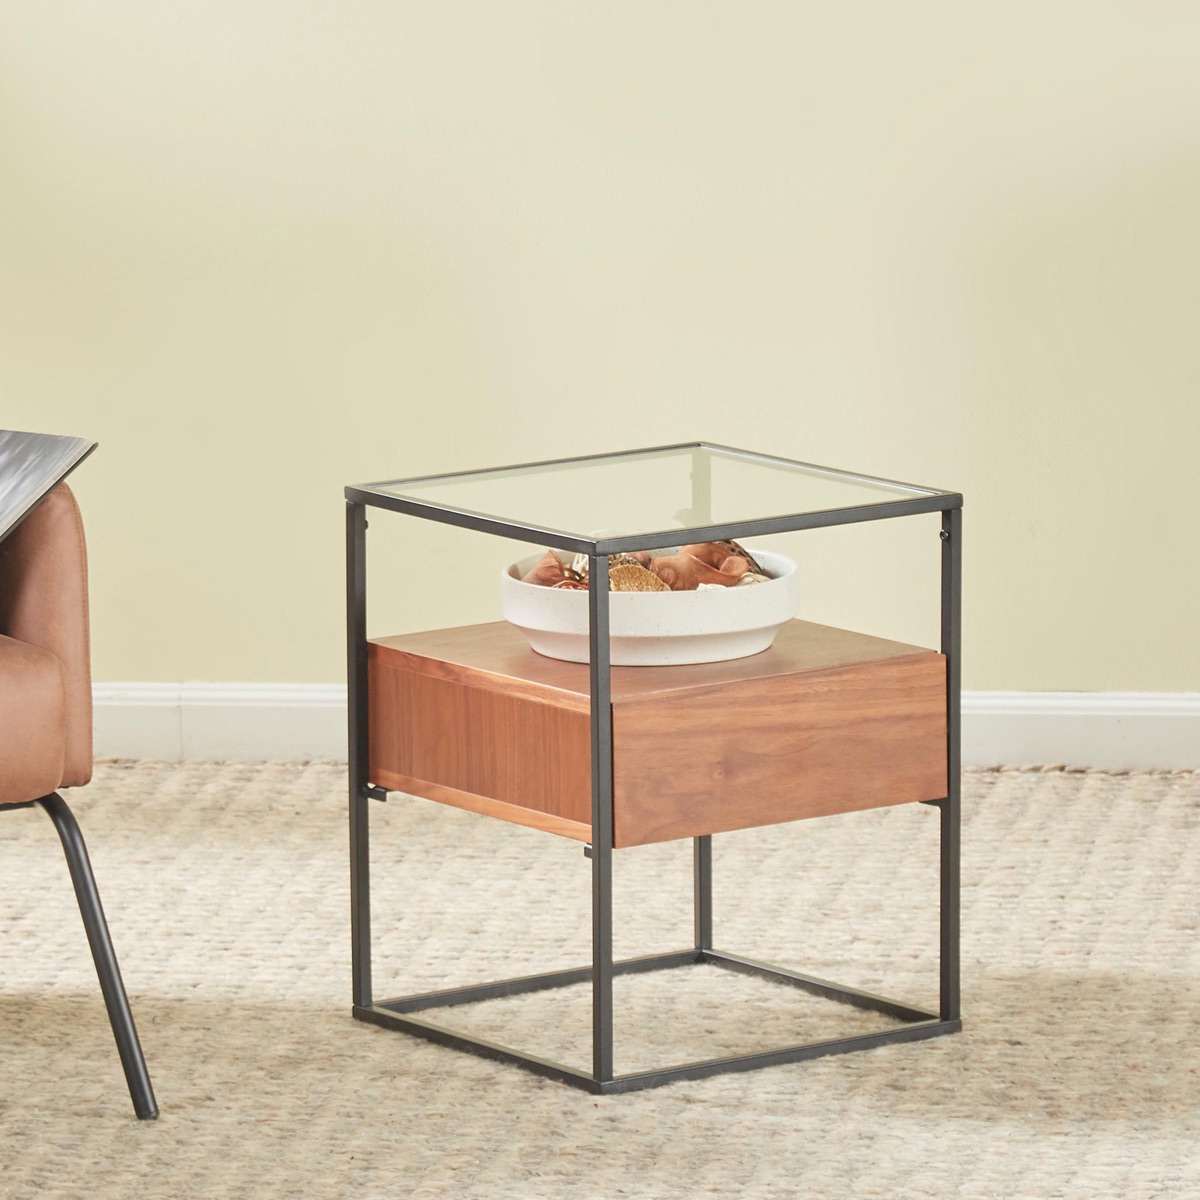 Home Centre Pax Model Coffee table  side table